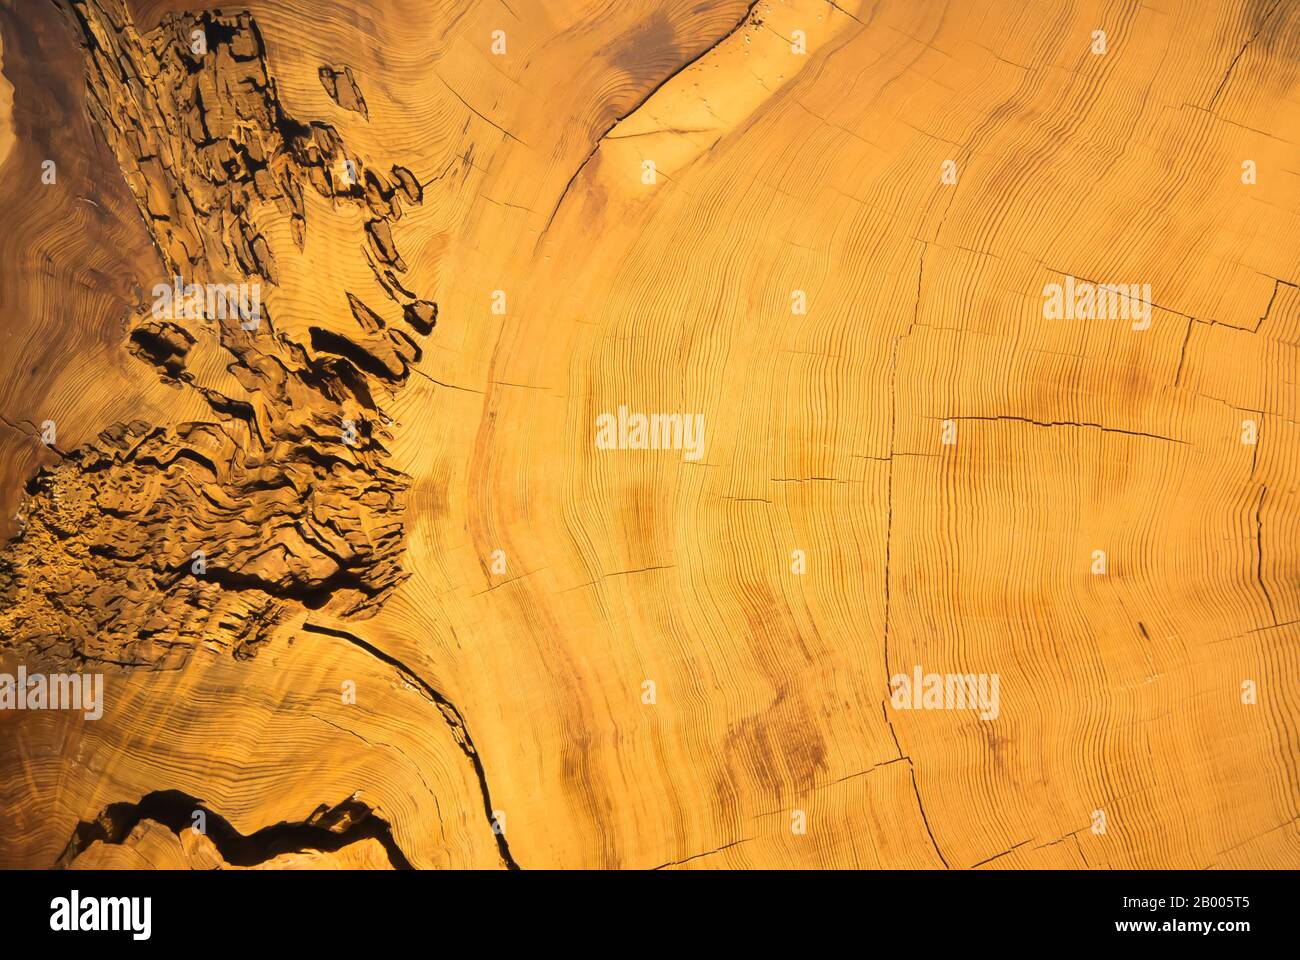 Tree Rings - A Measure of Time Stock Photo